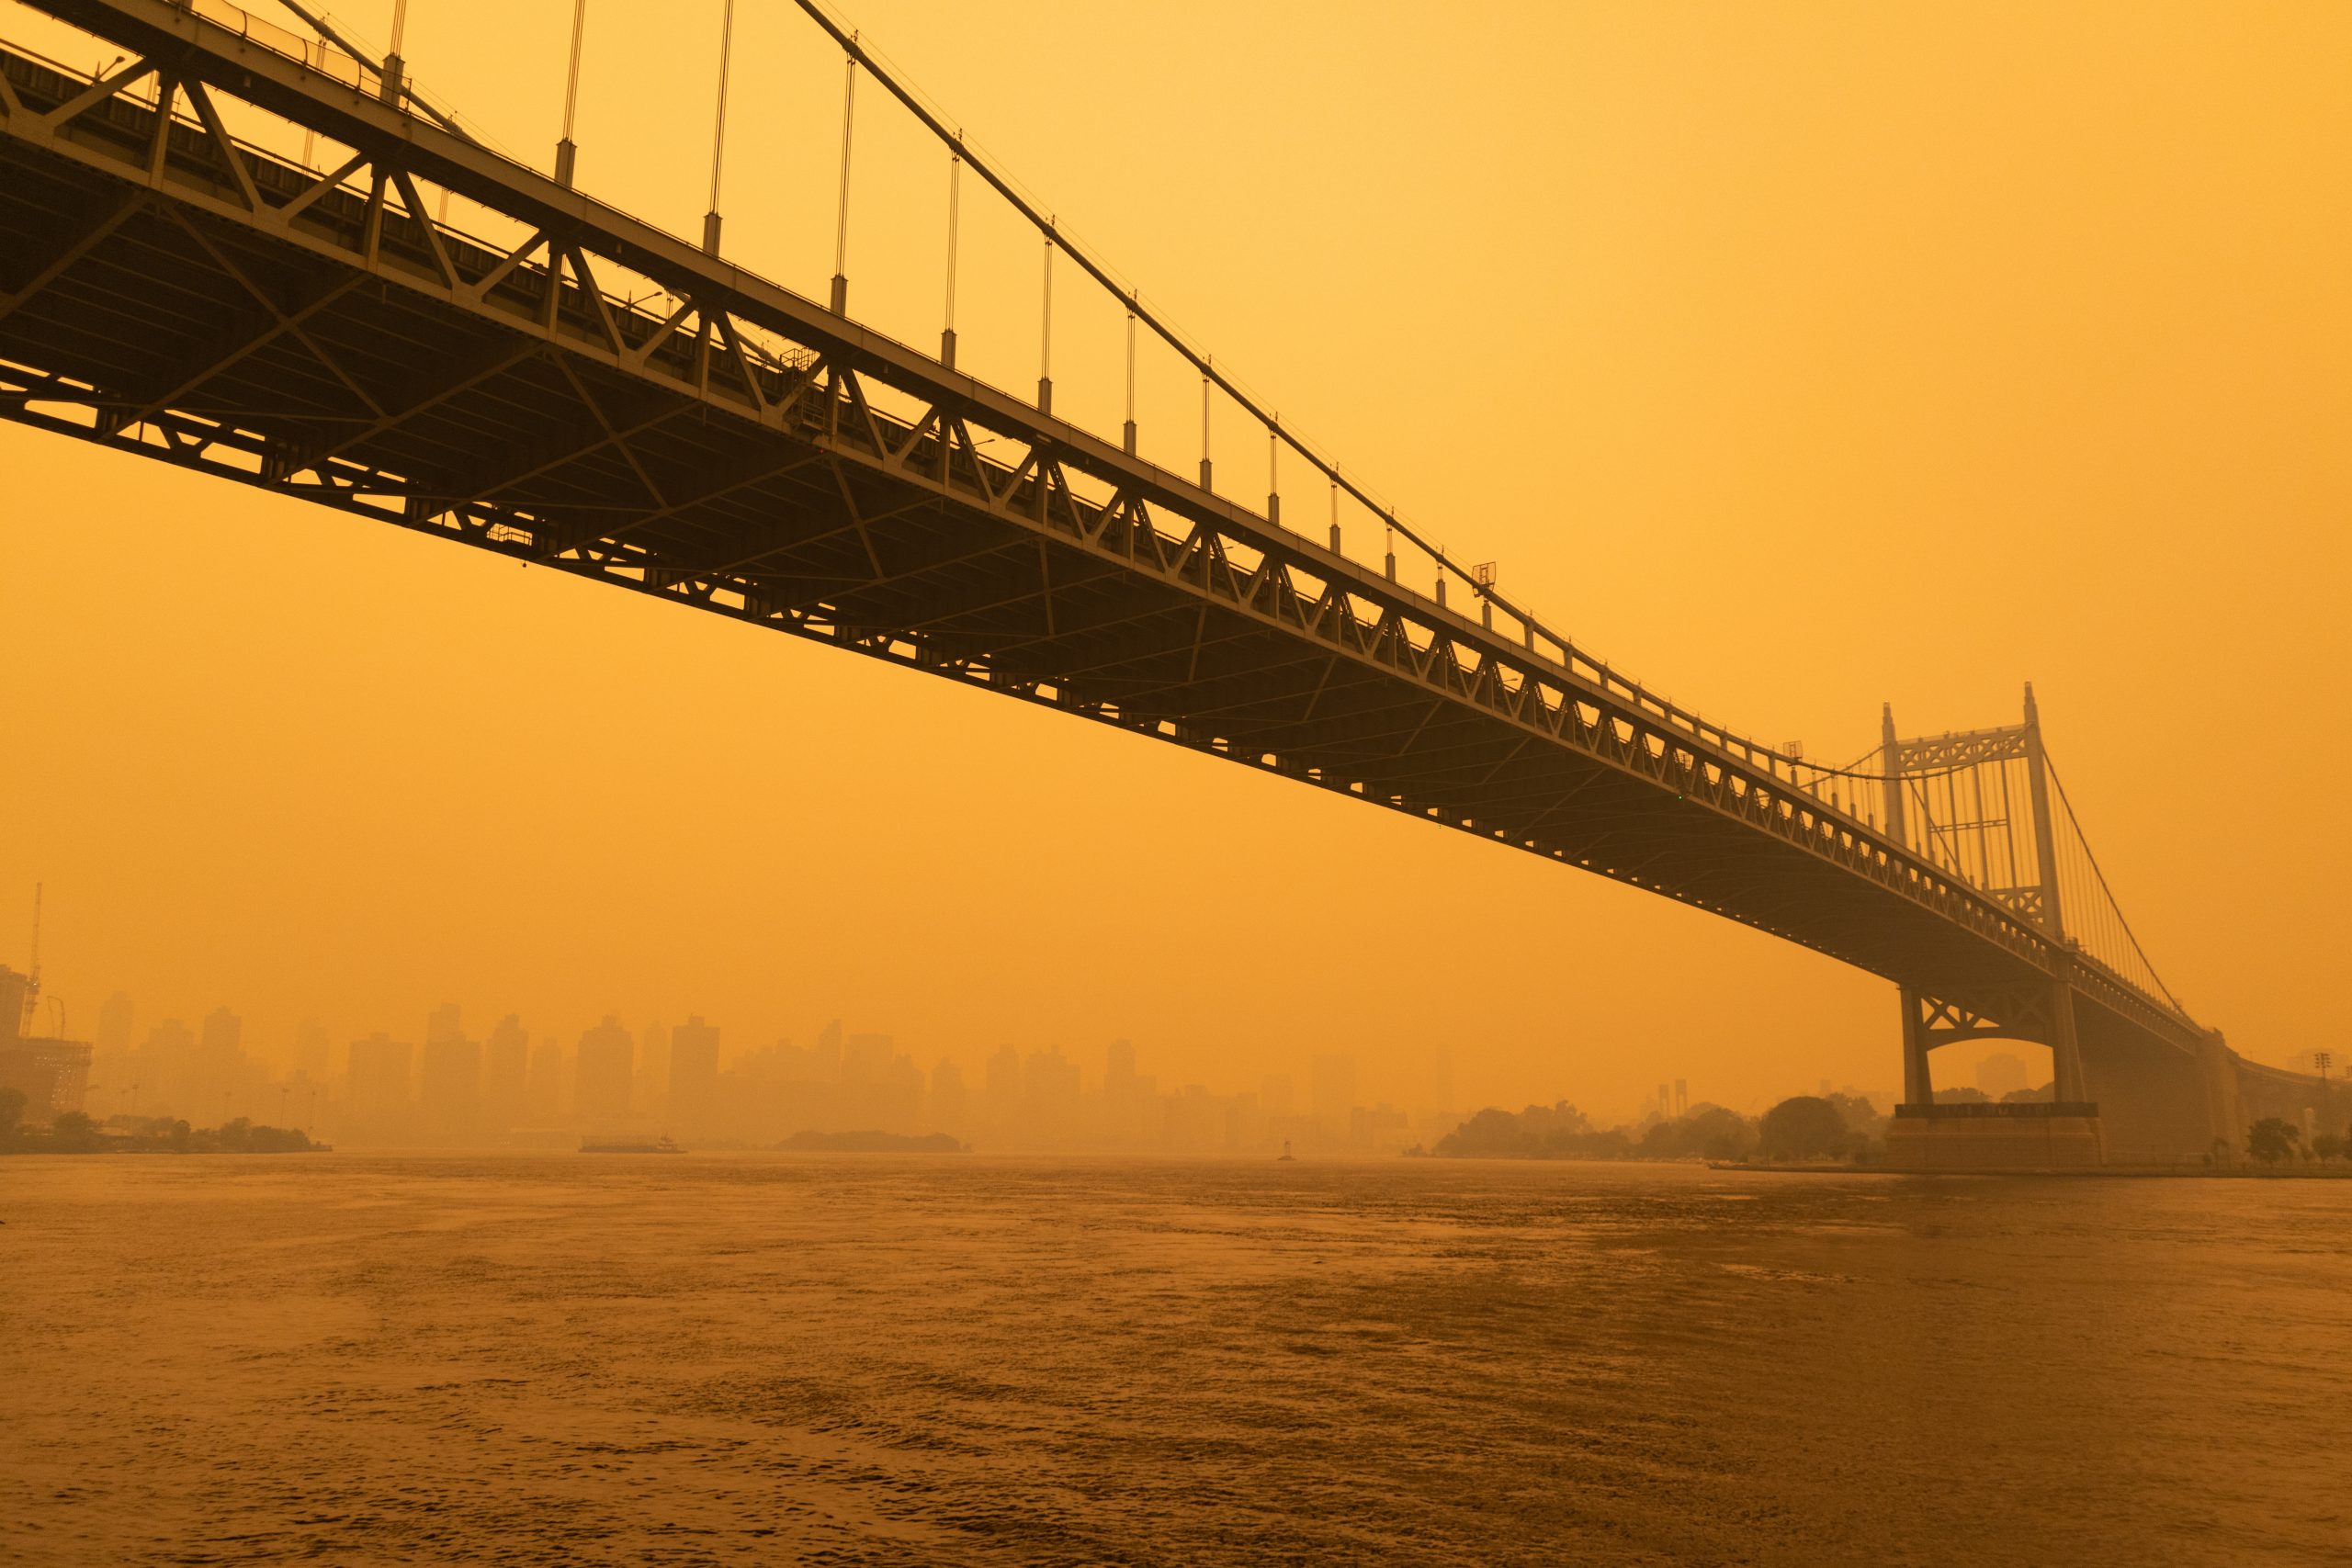 The Triborough Bridge crossing the East River shrouded in smoke from wildfires, The smoke has turned the daytime sky orange.